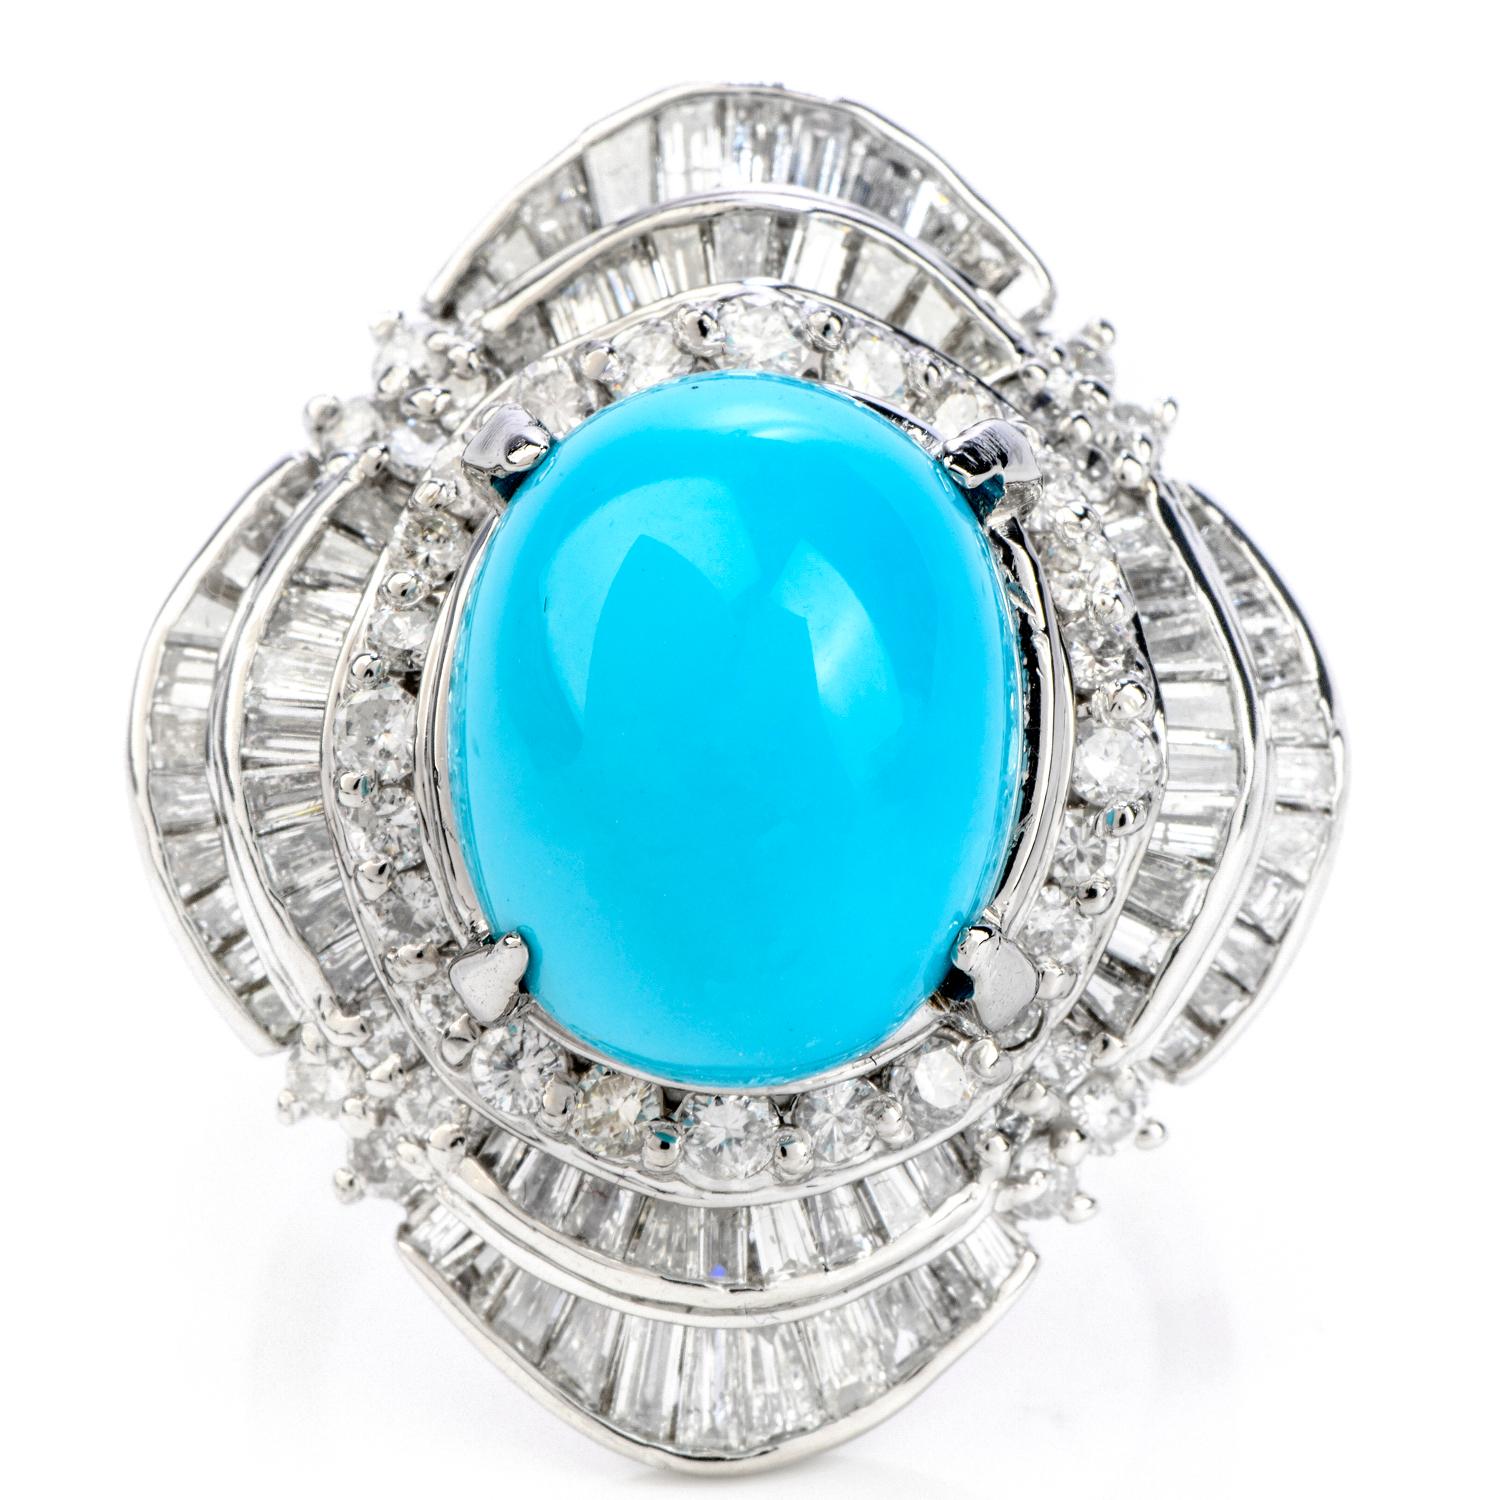 Feel the Splendorous Display from this Turquoise Ballerina Ring!   

Weighing approximatley 11.19 carats, This Oval Shaped Cabochon Sleeping Beauty Turquoise, is safely secured by four prongs, and Surrounding this gourgeuous stone, Dancing and